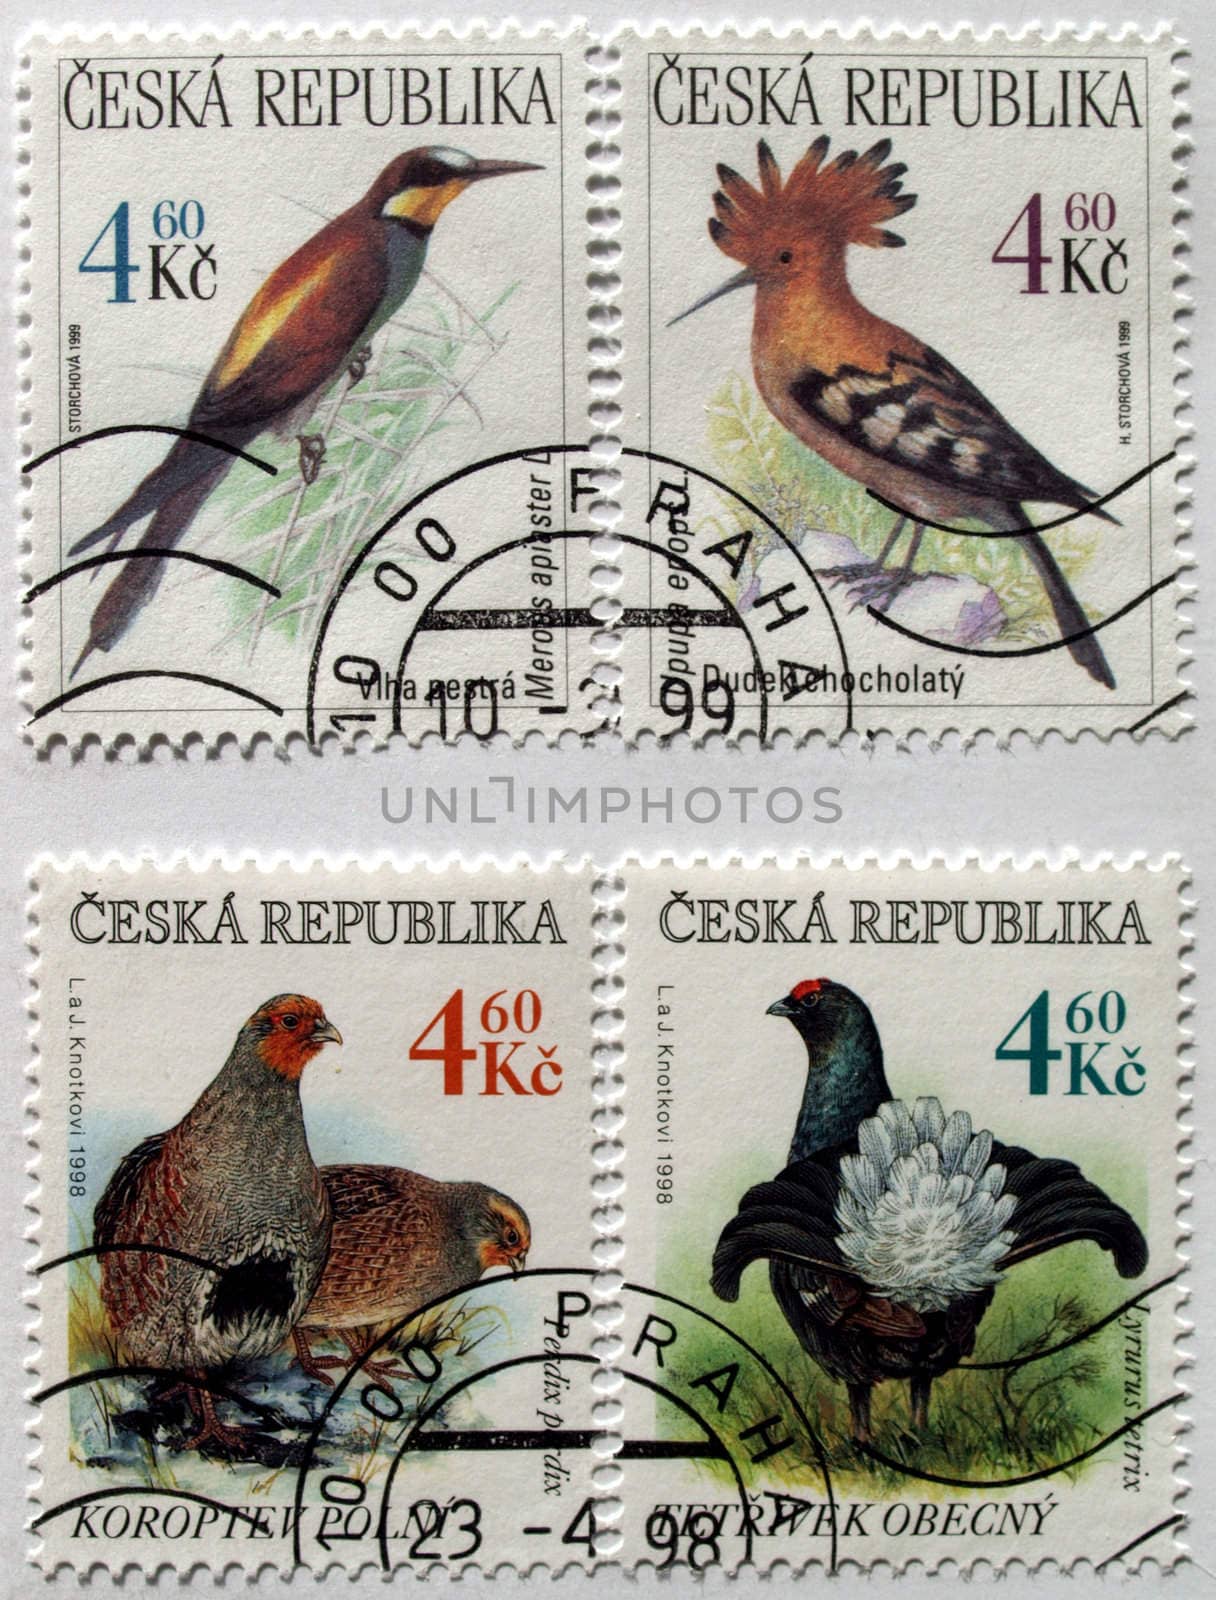 Czech Republic mail postage stamps with birds images